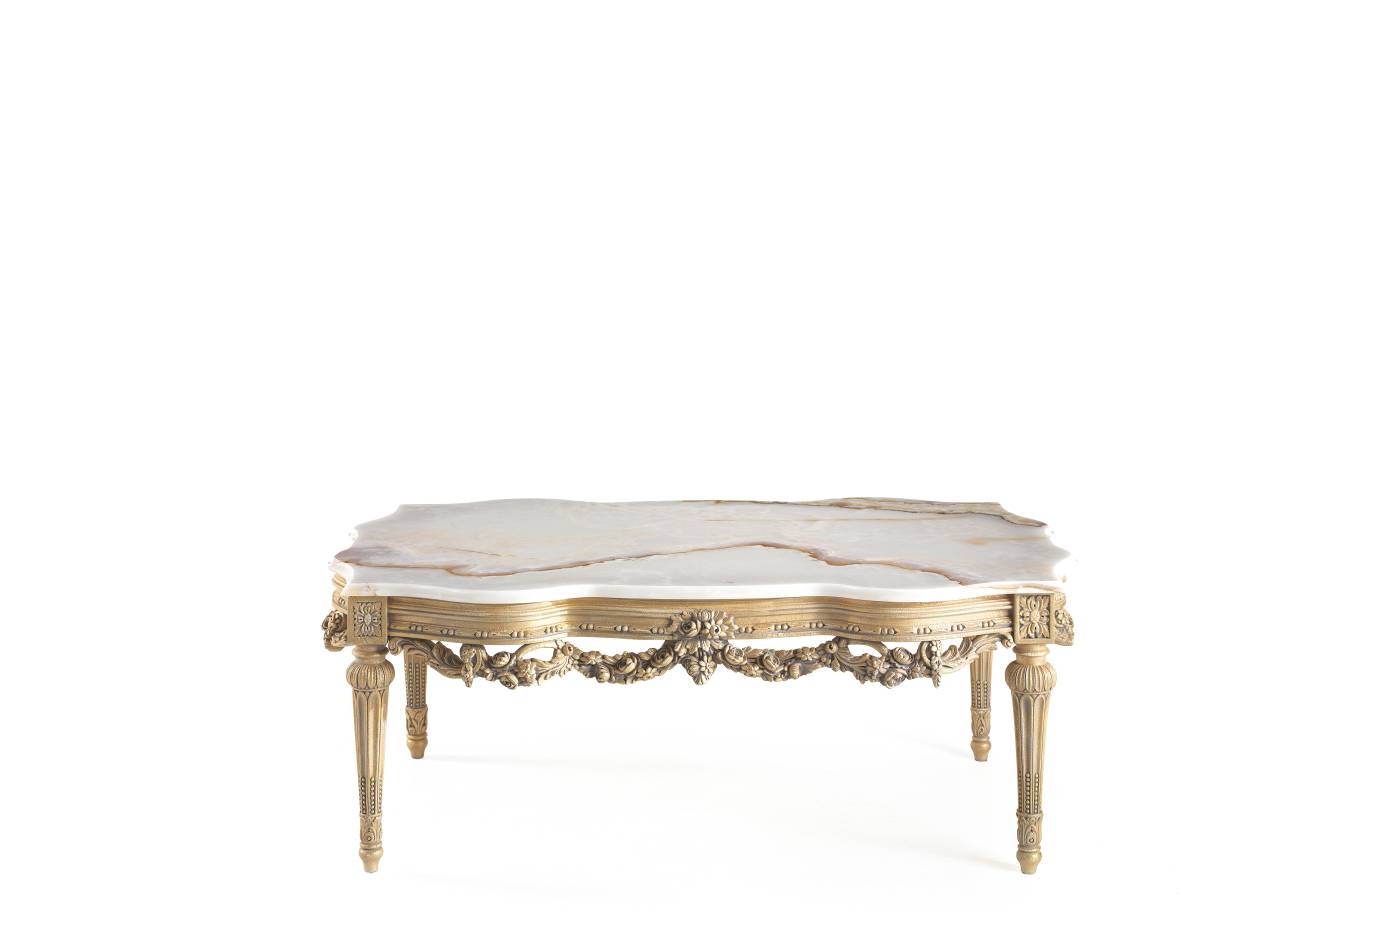 SCARLETT low table - Bespoke projects with luxury Made in Italy classic furniture